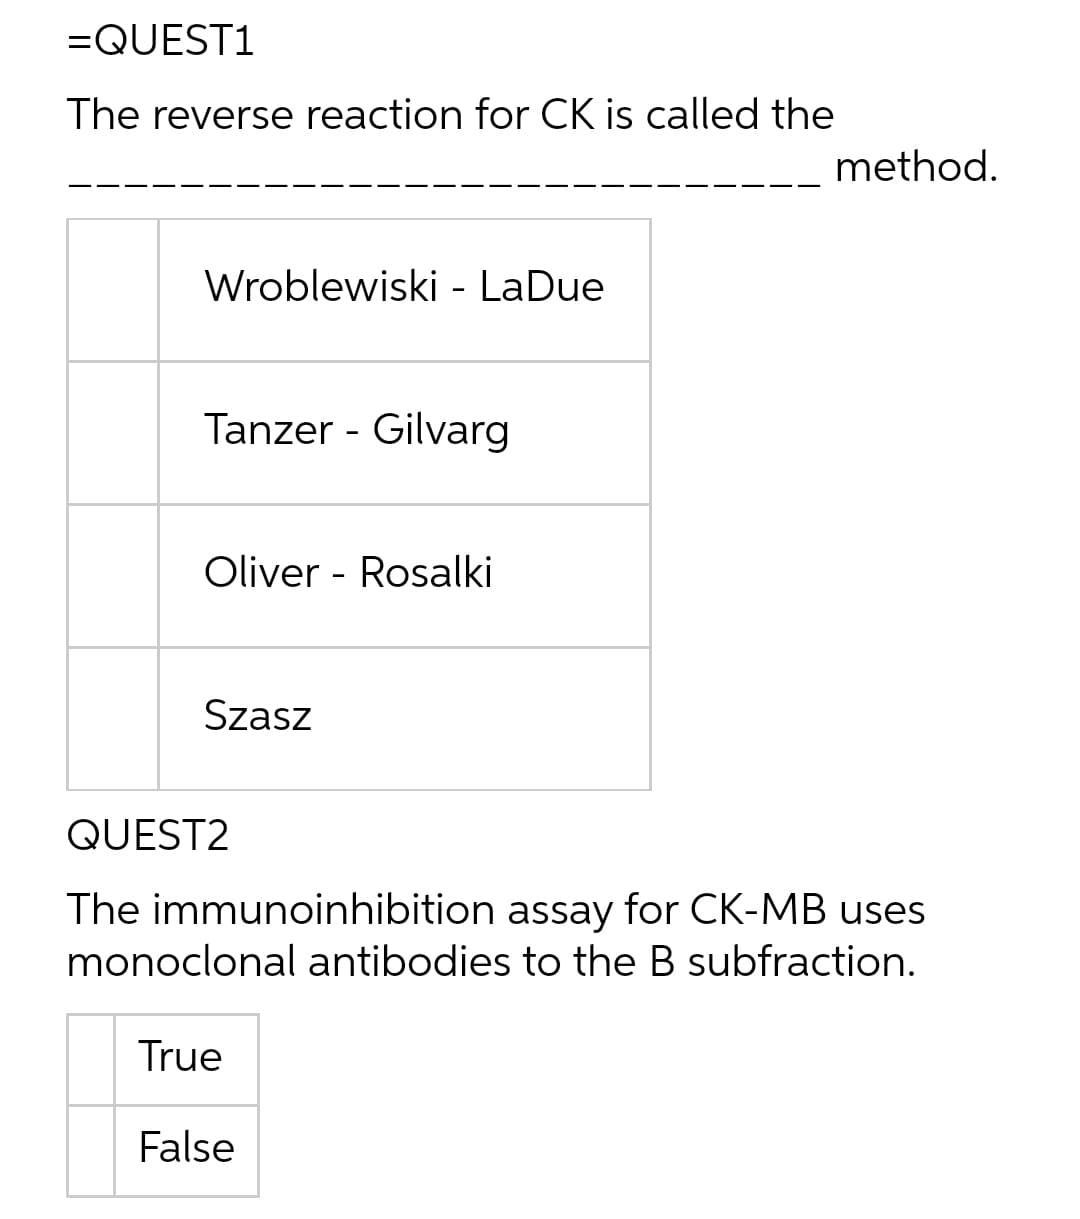 =QUEST1
The reverse reaction for CK is called the
method.
Wroblewiski - LaDue
Tanzer - Gilvarg
Oliver - Rosalki
Szasz
QUEST2
The immunoinhibition assay for CK-MB uses
monoclonal antibodies to the B subfraction.
True
False
